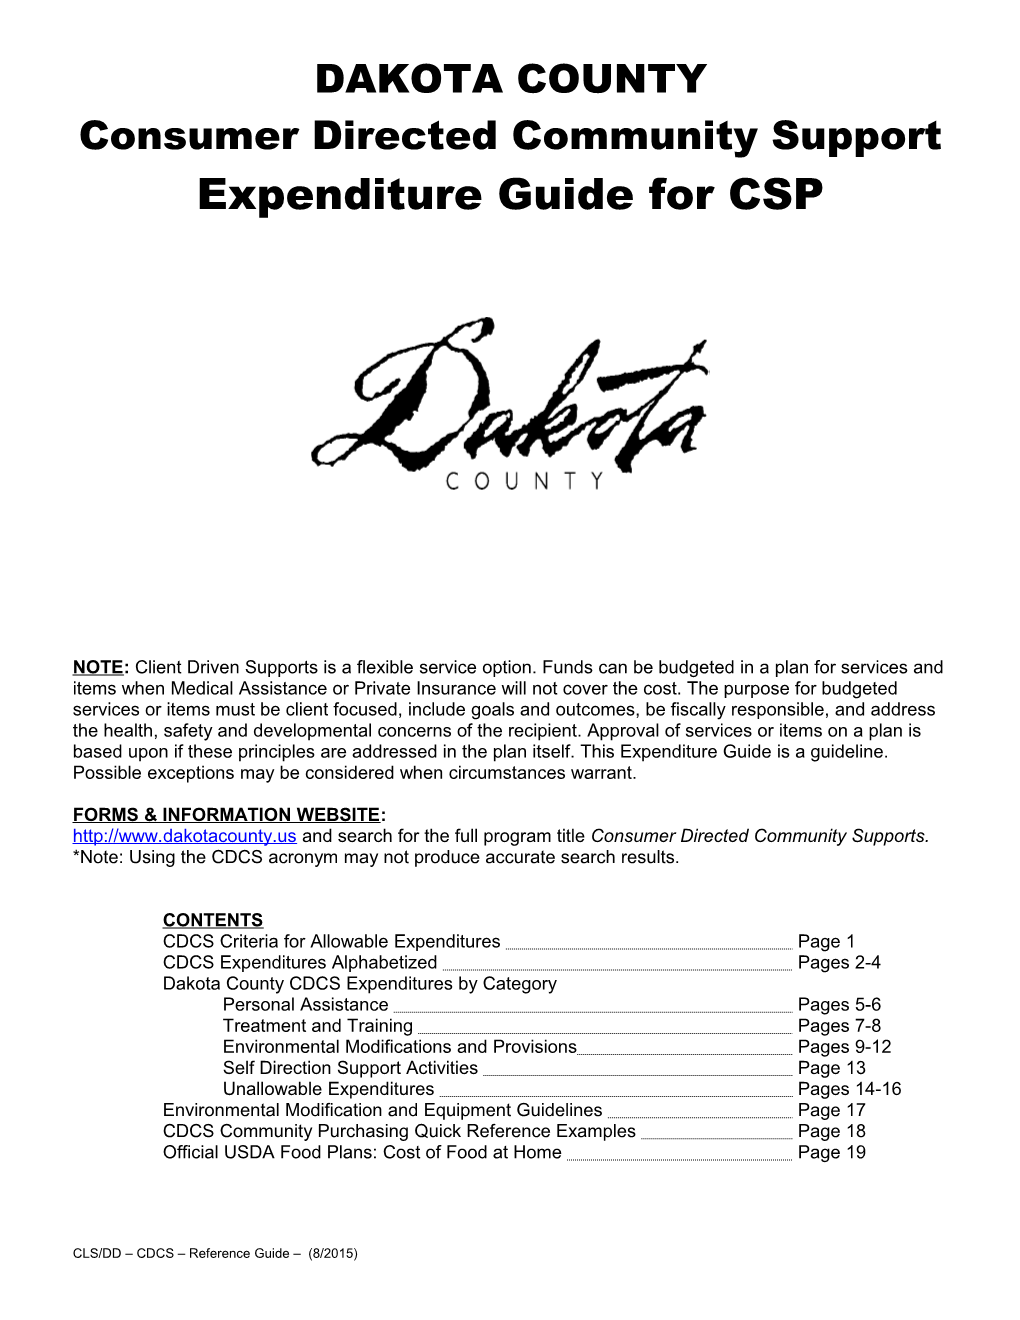 CDCS Expenditure Guide